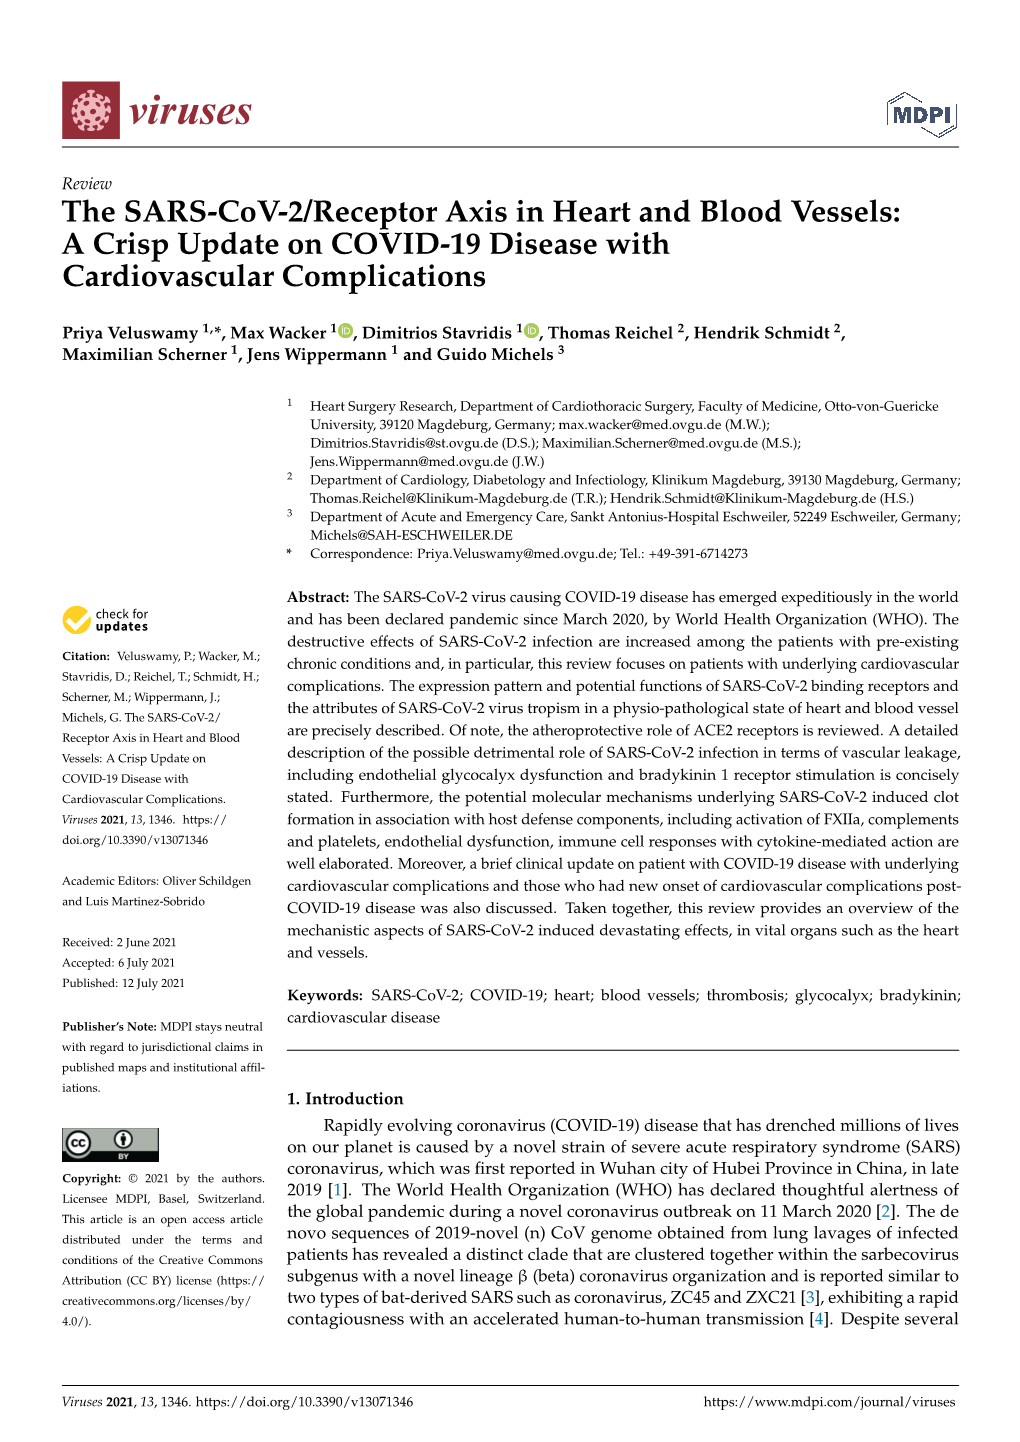 The SARS-Cov-2/Receptor Axis in Heart and Blood Vessels: a Crisp Update on COVID-19 Disease with Cardiovascular Complications